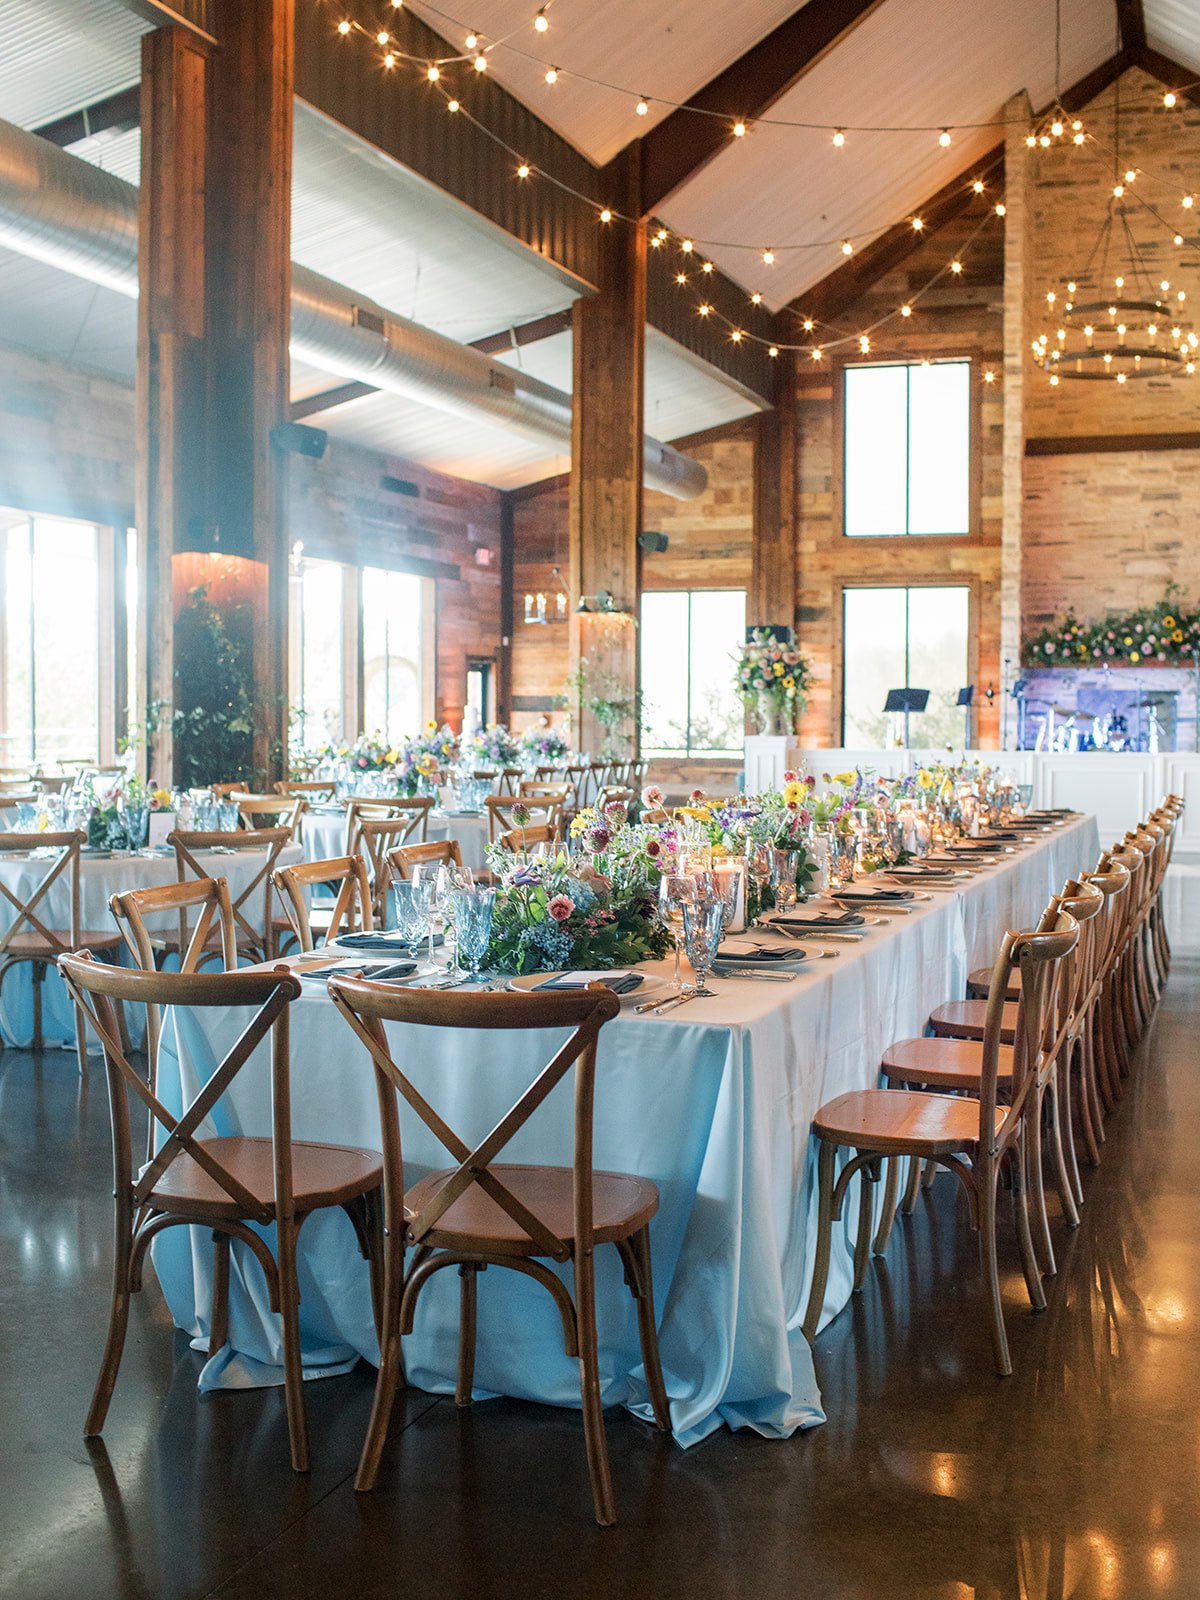 Stone Crest Venue wedding reception with light blue linen by Texas Ranch wedding planner Shannon rose events